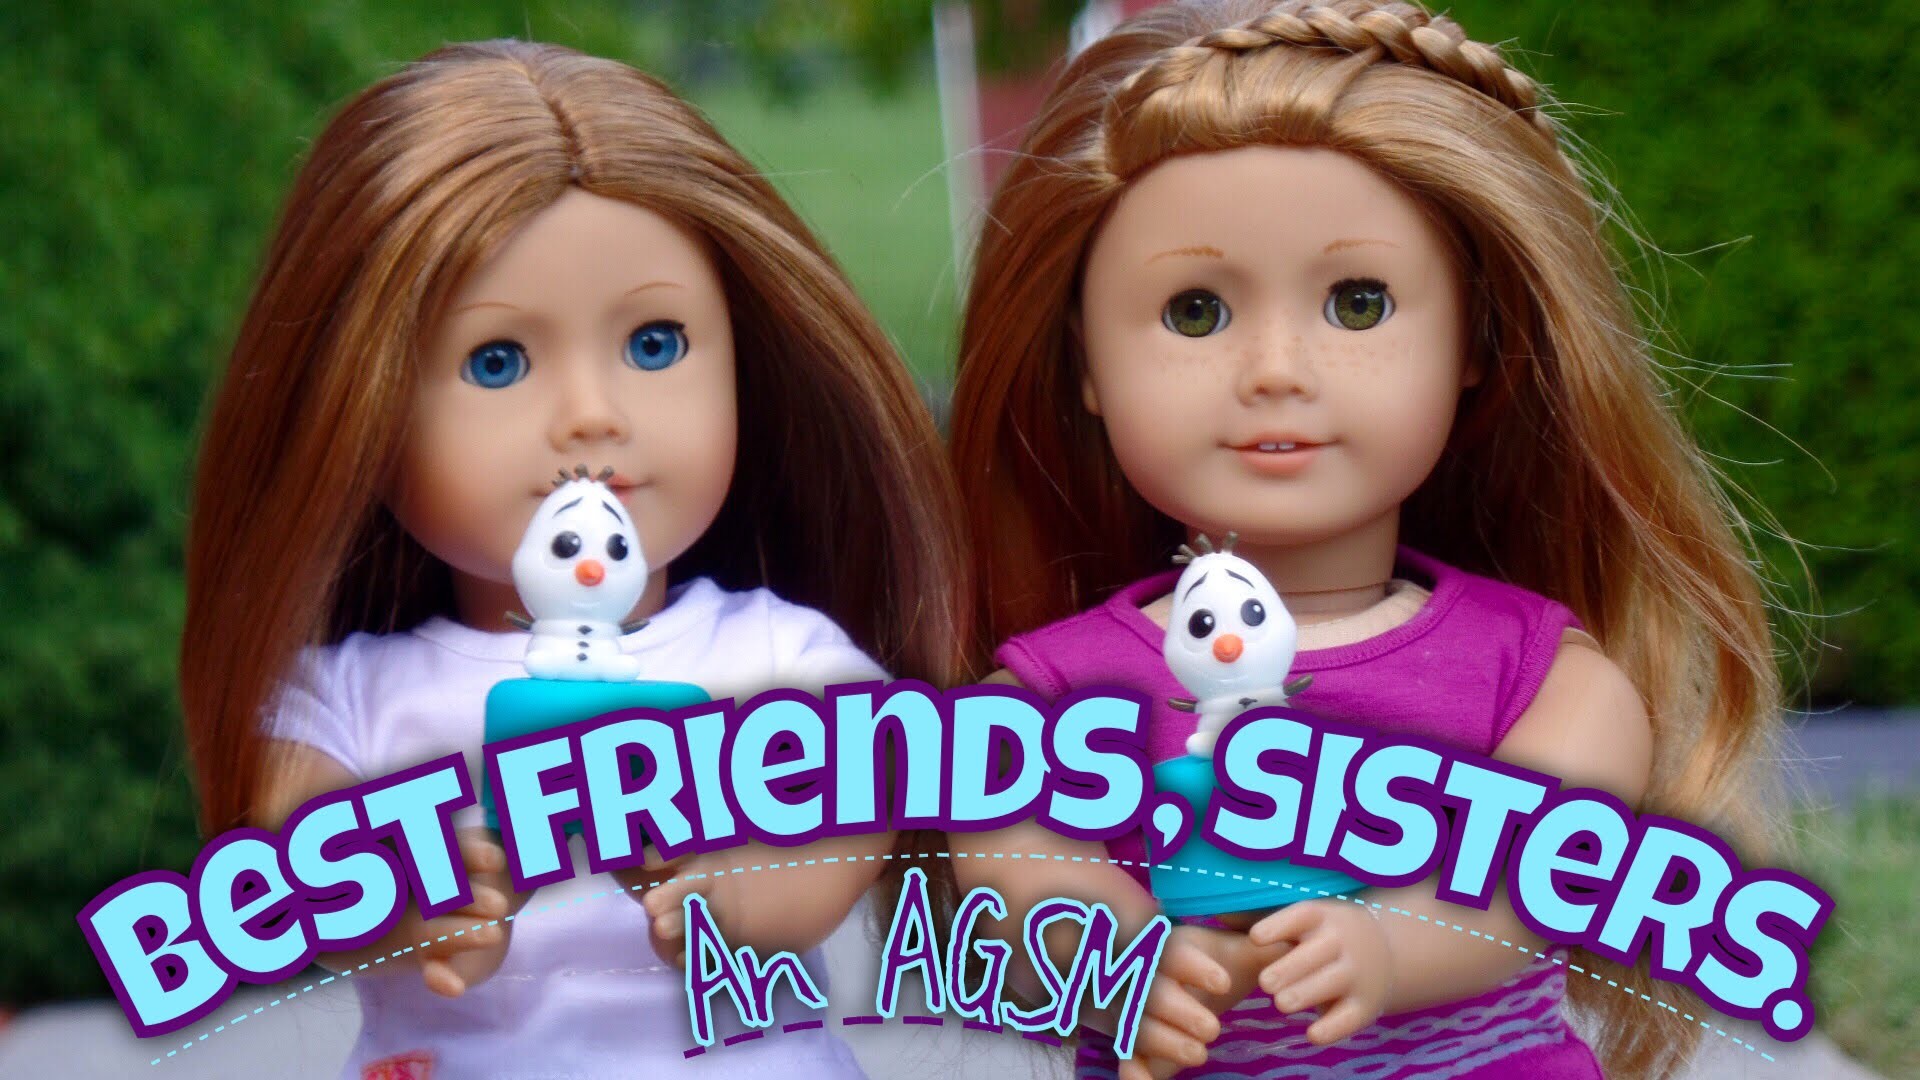 1920x1080 AGSM|American Girl Doll Stop-motion|1st in MrRubydoo234's contest - YouTube